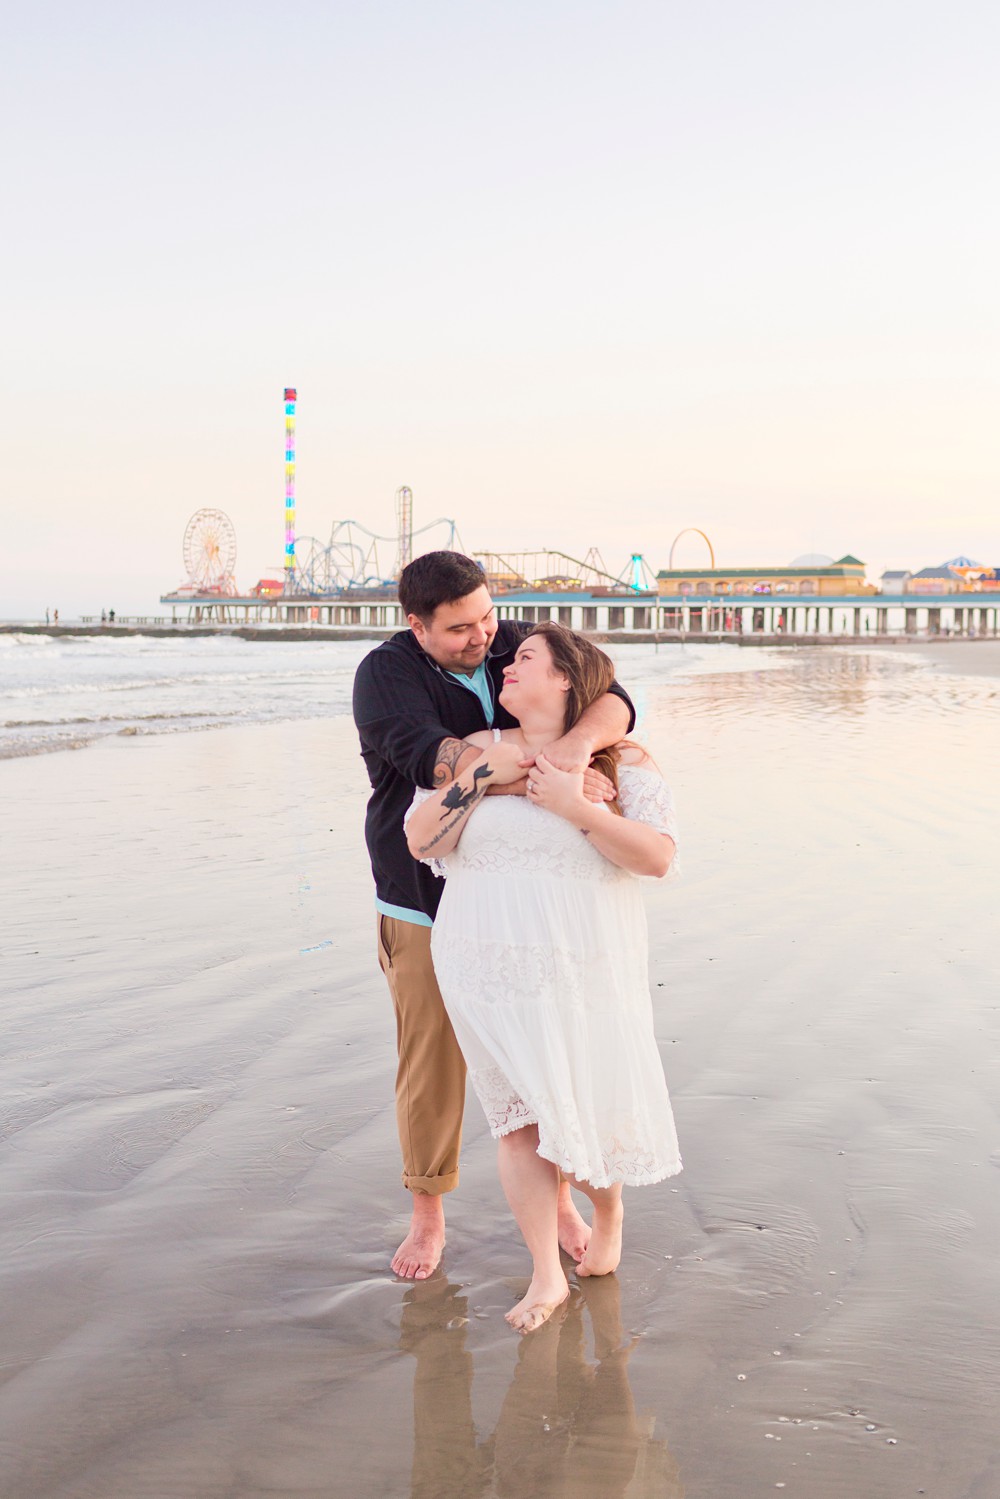 Couple on Galveston Beach at sunset with Pleasure Pier in the background